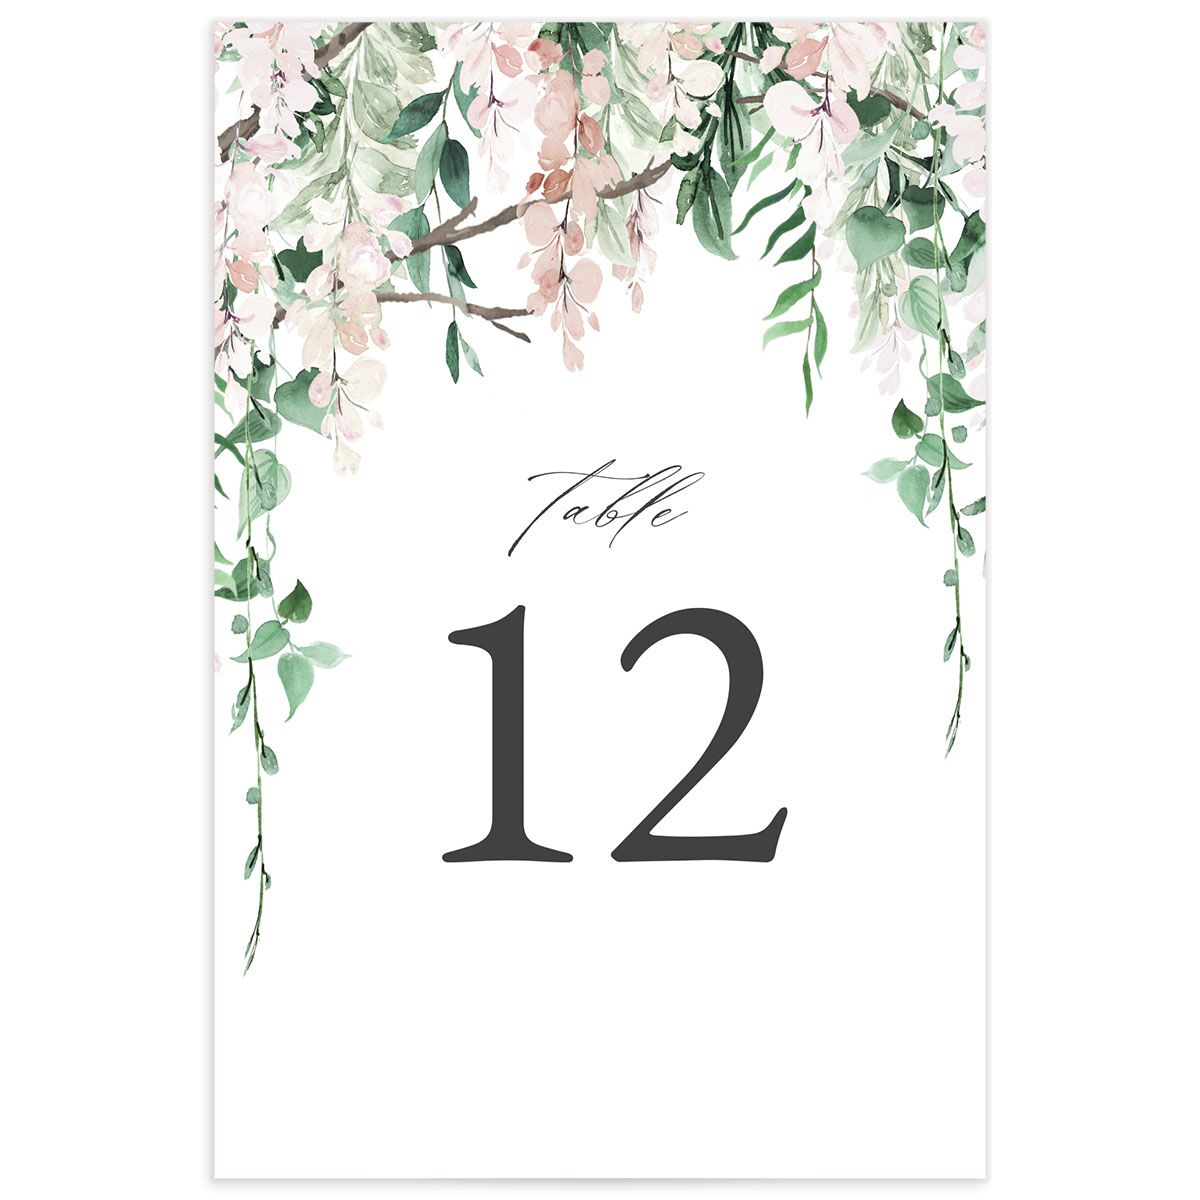 Enchanting Wisteria Table Numbers front